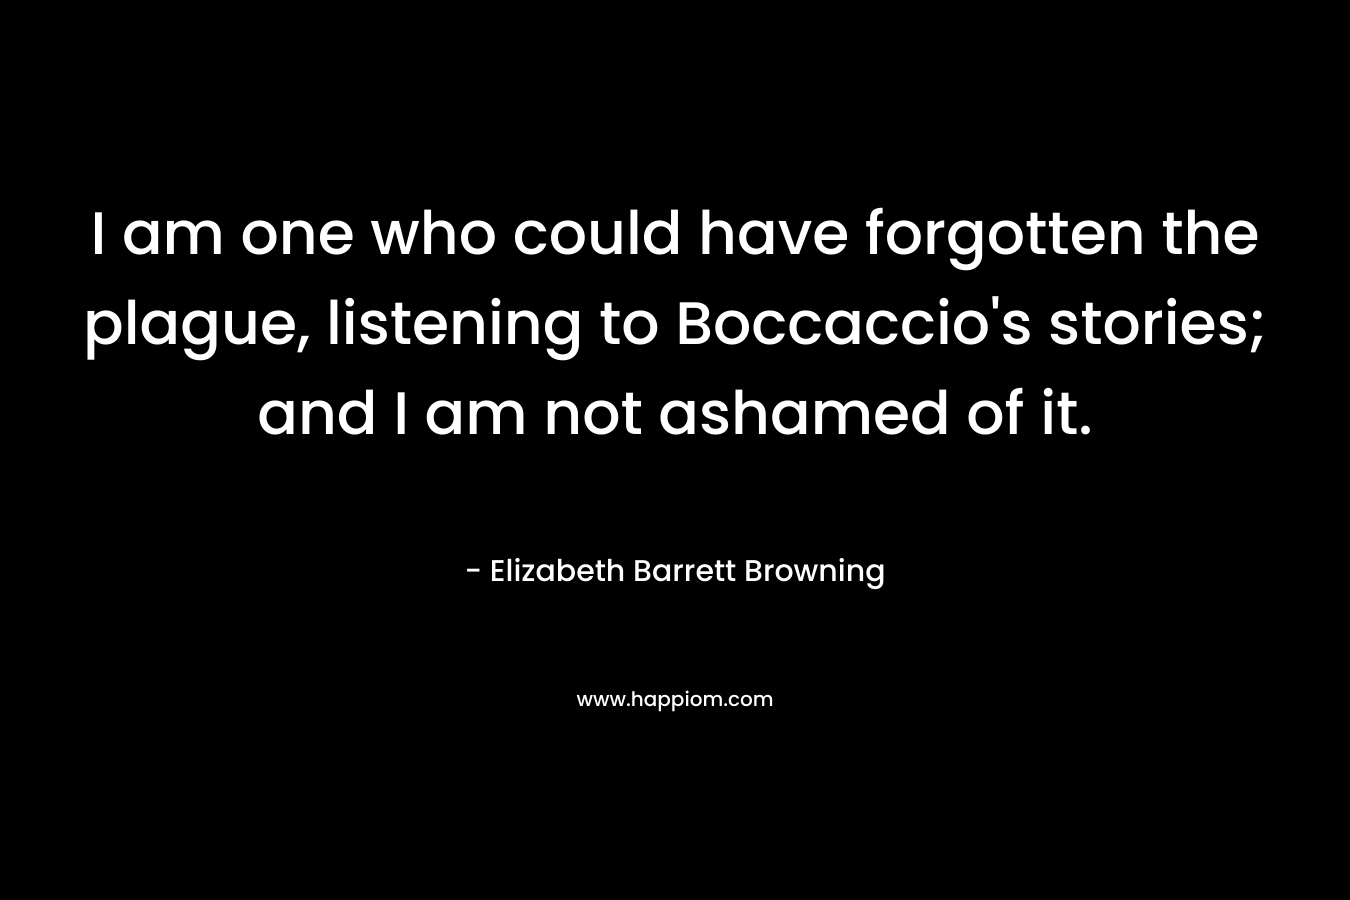 I am one who could have forgotten the plague, listening to Boccaccio’s stories; and I am not ashamed of it. – Elizabeth Barrett Browning